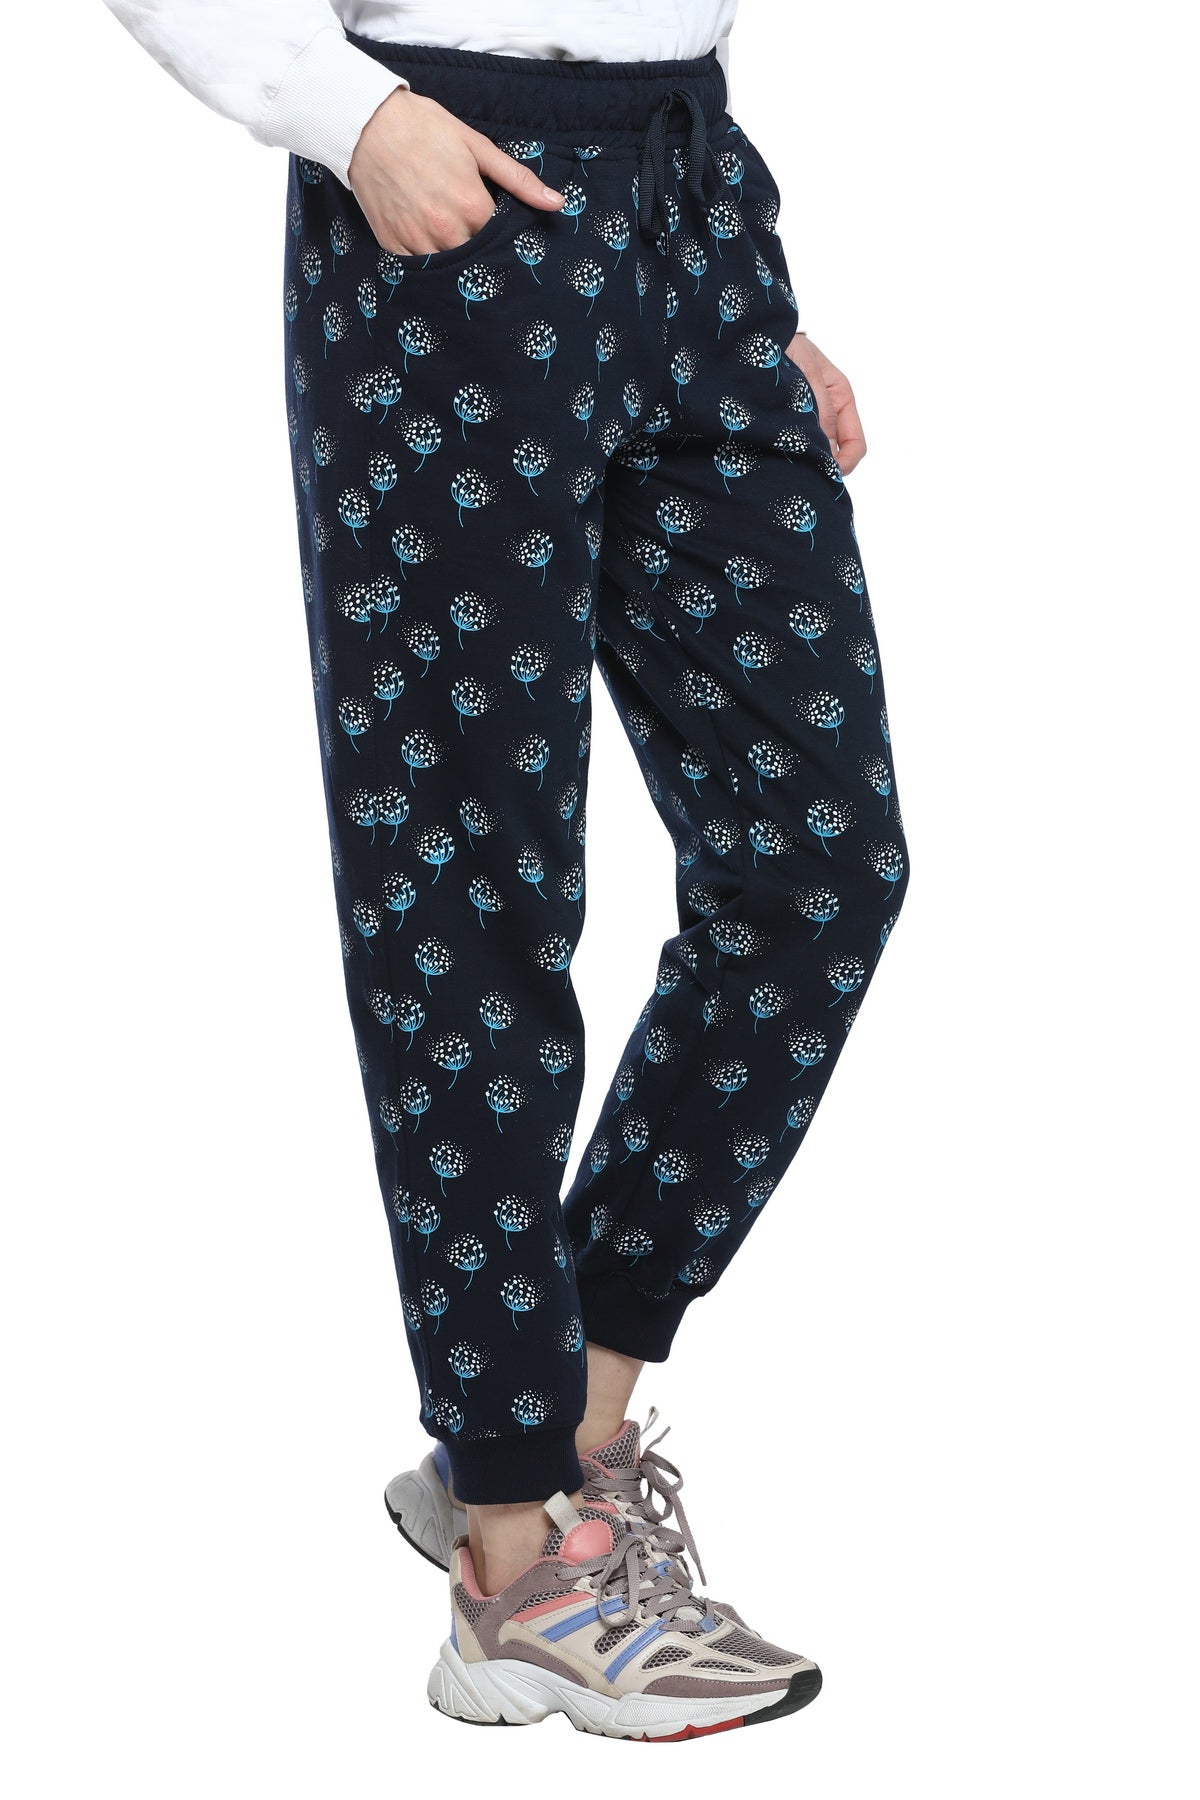 Comfortable Navy Blue Winter Fleece Cotton Printed Joggers for Women online in India